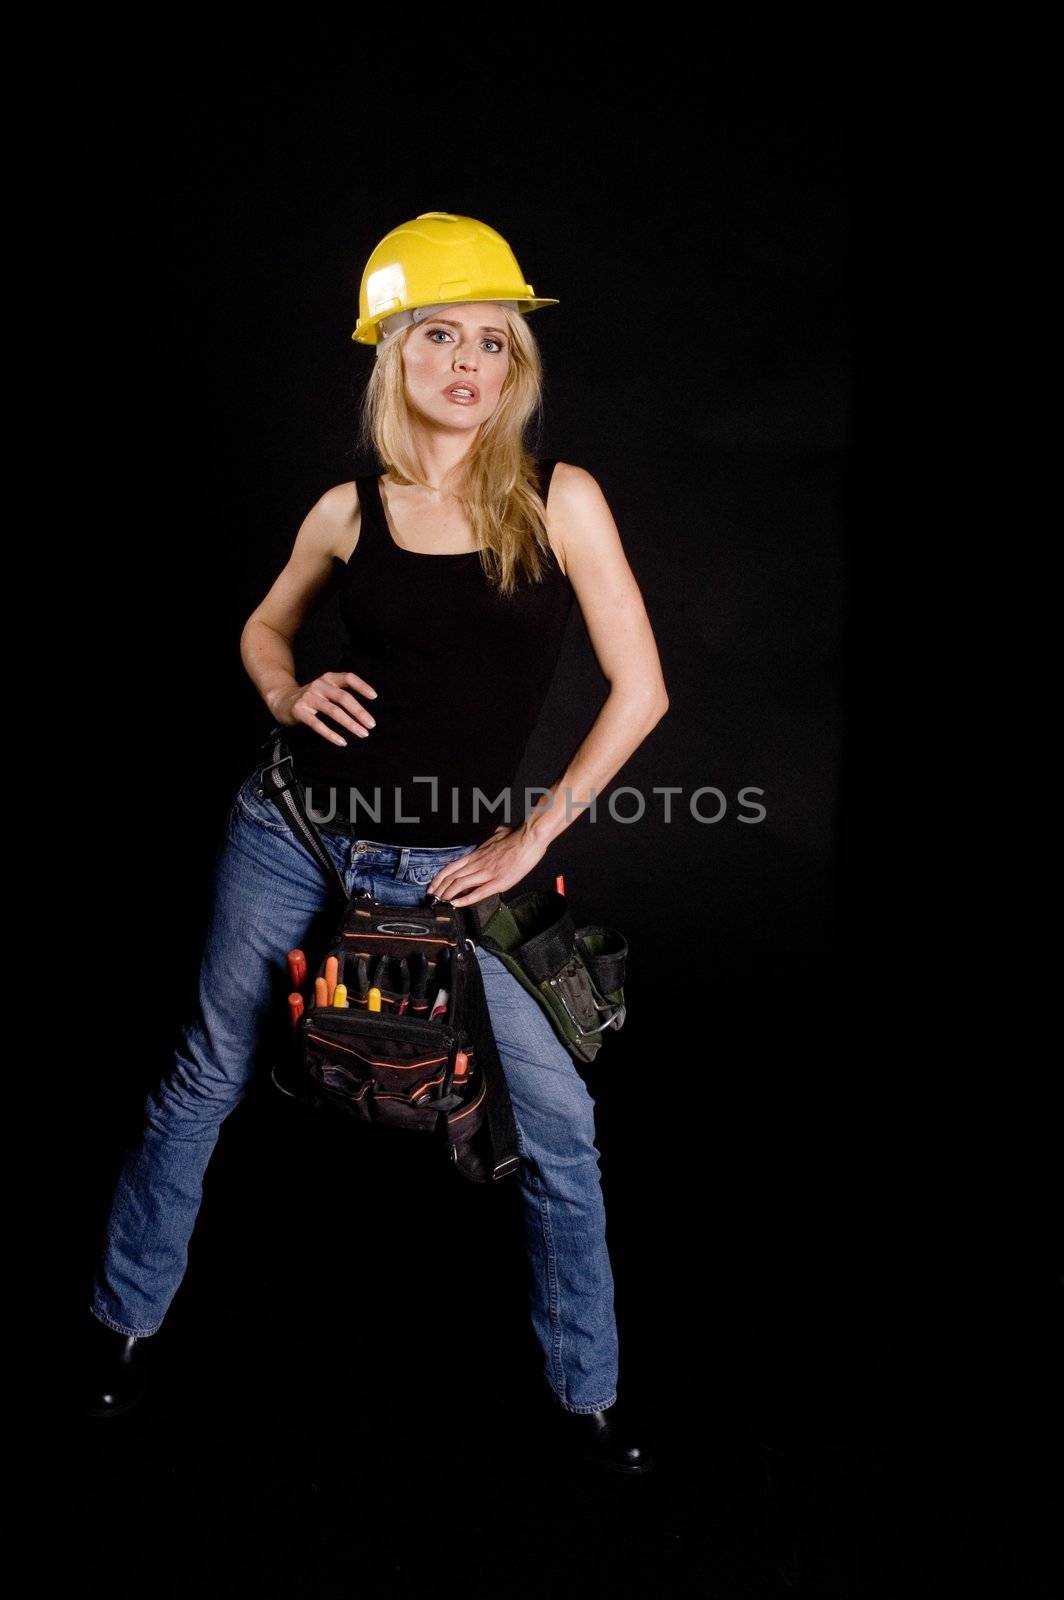 sexy blond female construction worker by jeffbanke